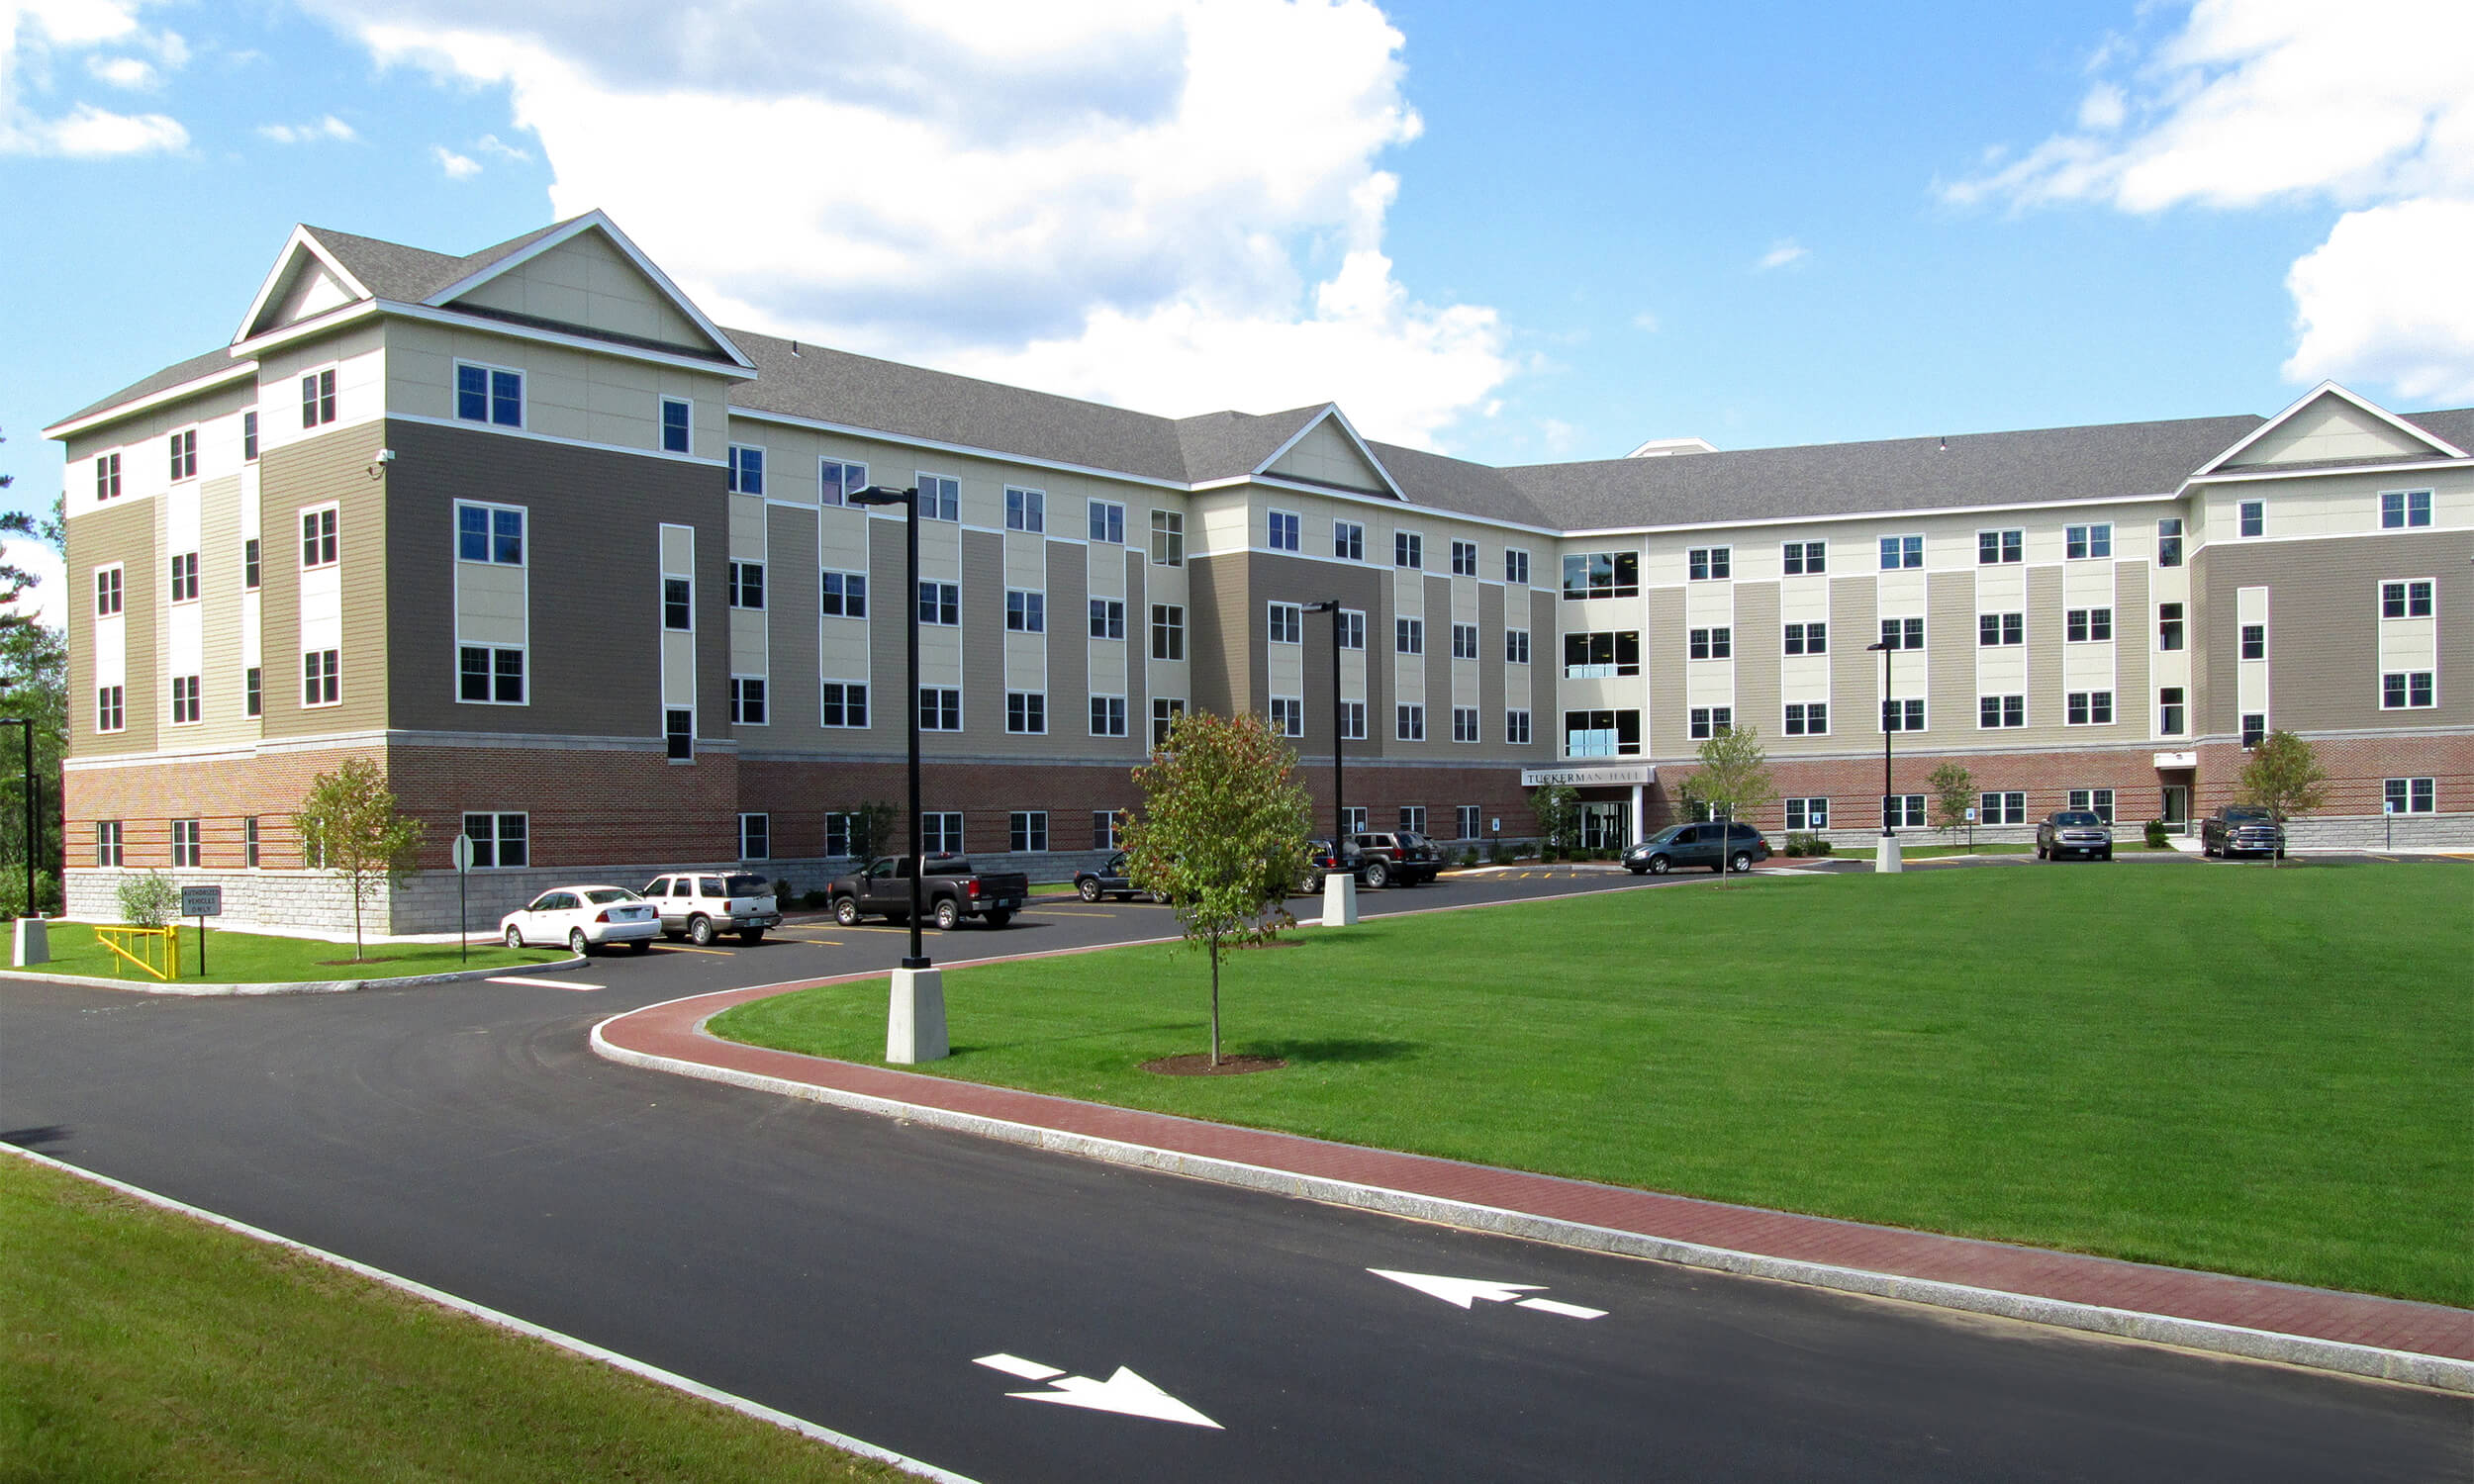 Exterior view of a college campus building with light brown and white facade and a green courtyard area in front.